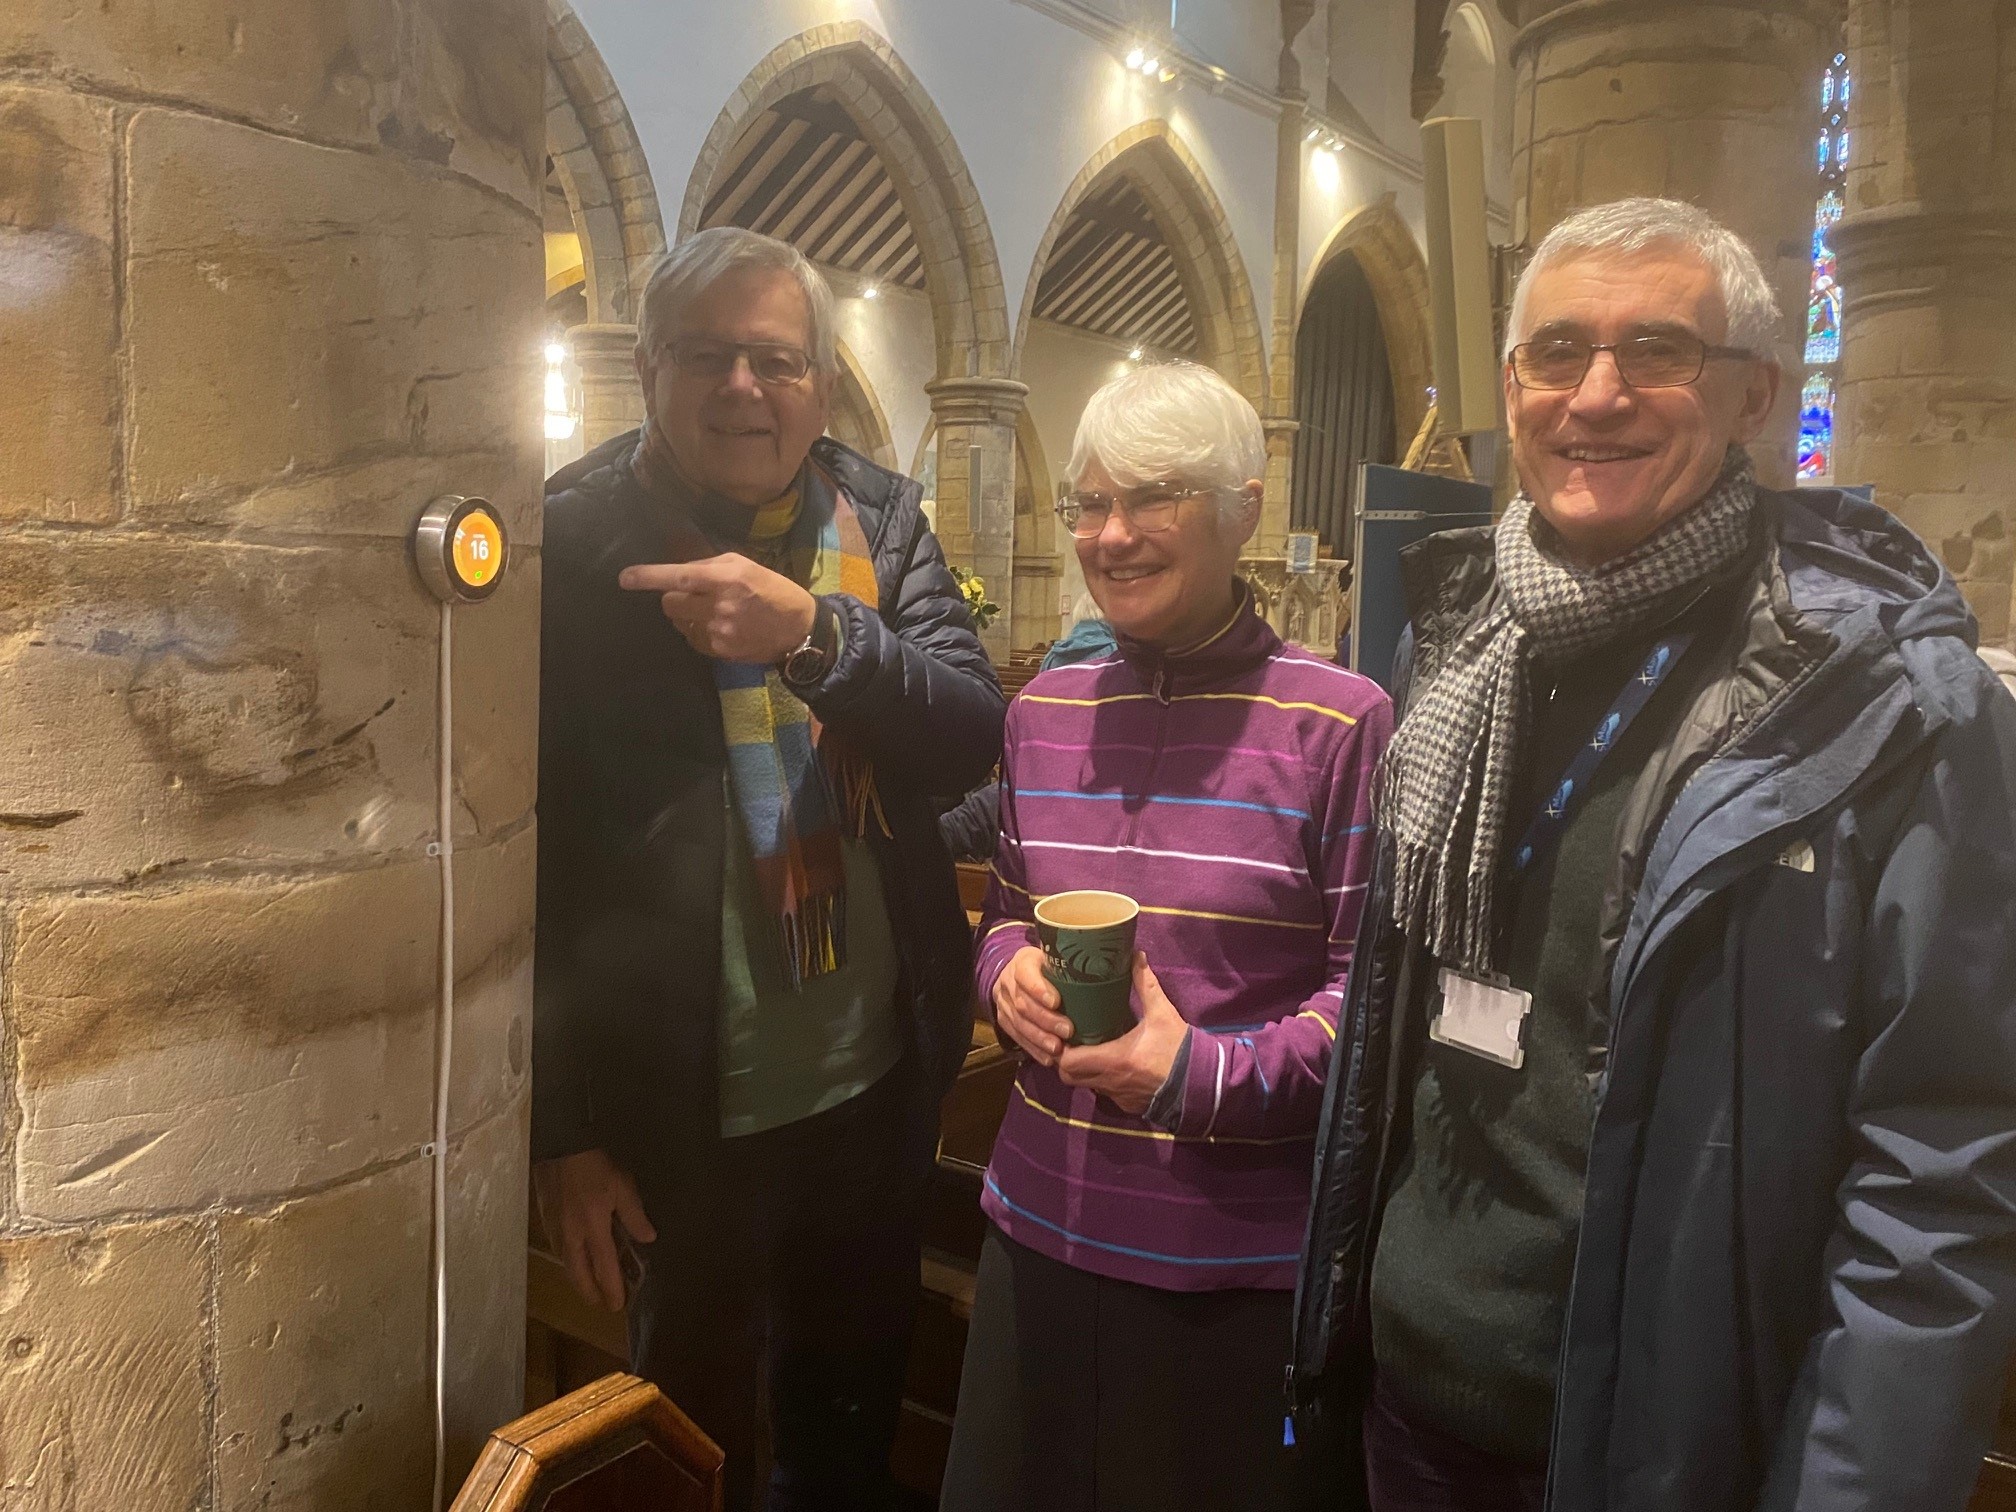 Picture of 3 of the members of the church smiling at the nest thermostat installed on the church wall